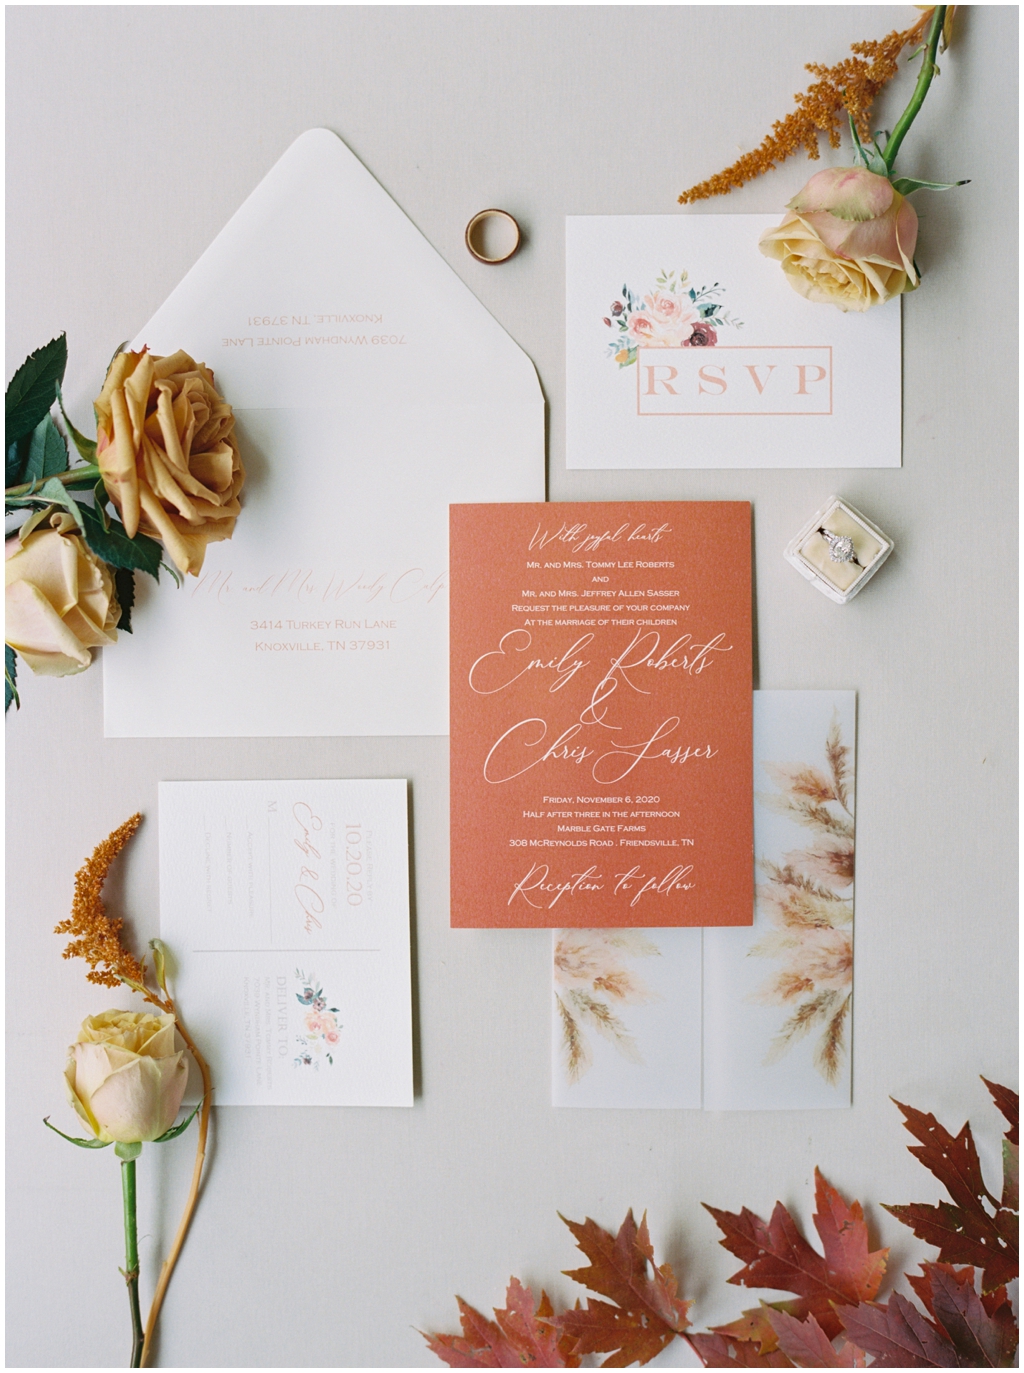 A fall inspired orange & muted yellows wedding invitation suite